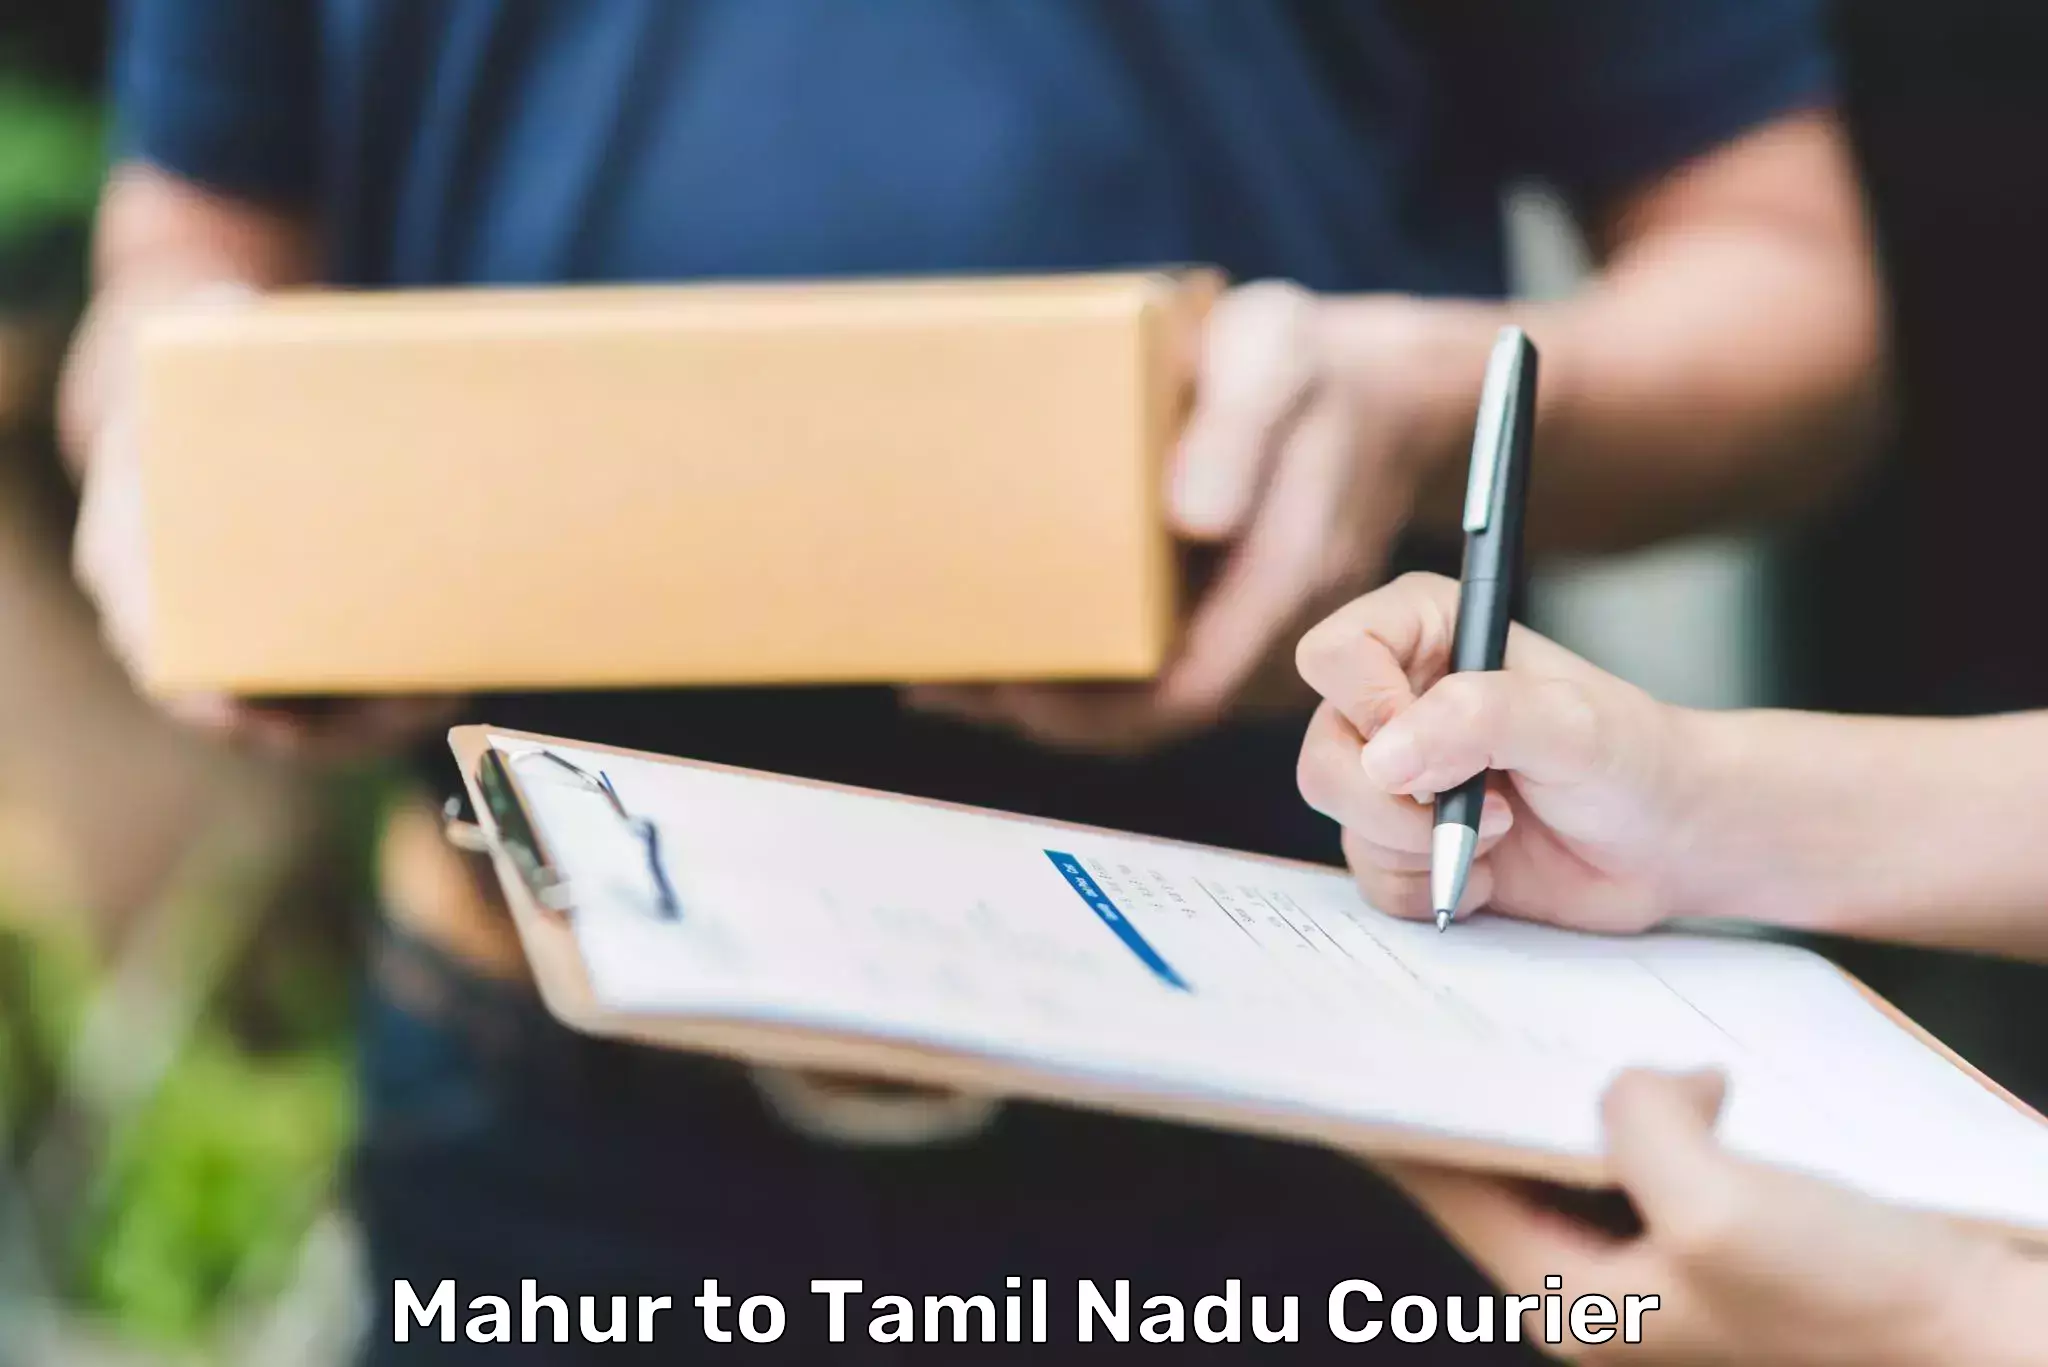 End-to-end delivery Mahur to Tamil Nadu